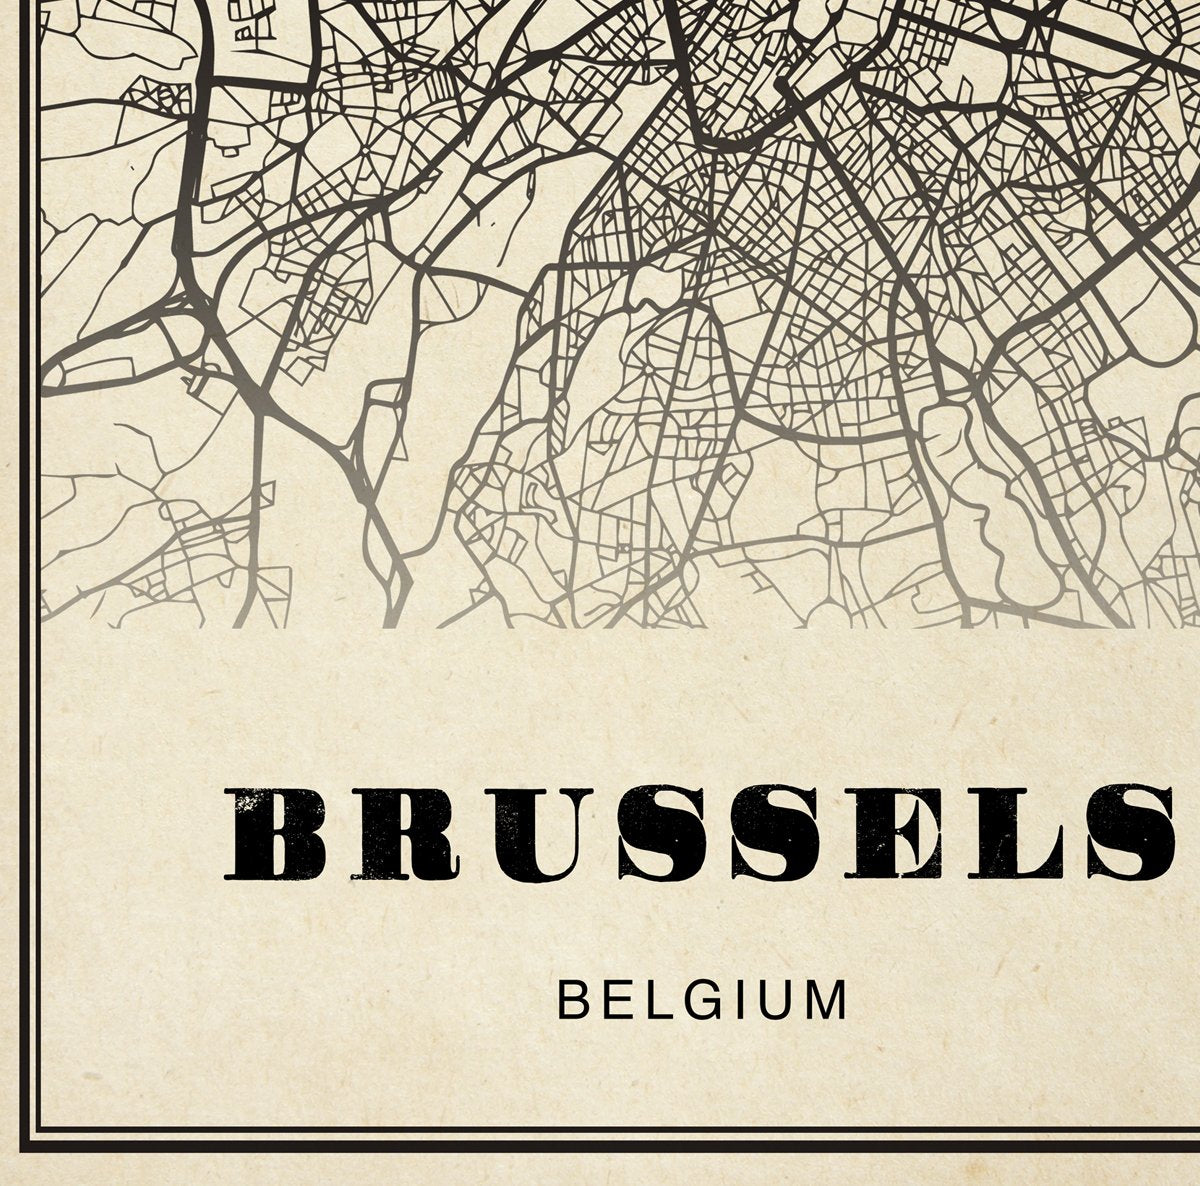 Brussels City Map Sepia Poster